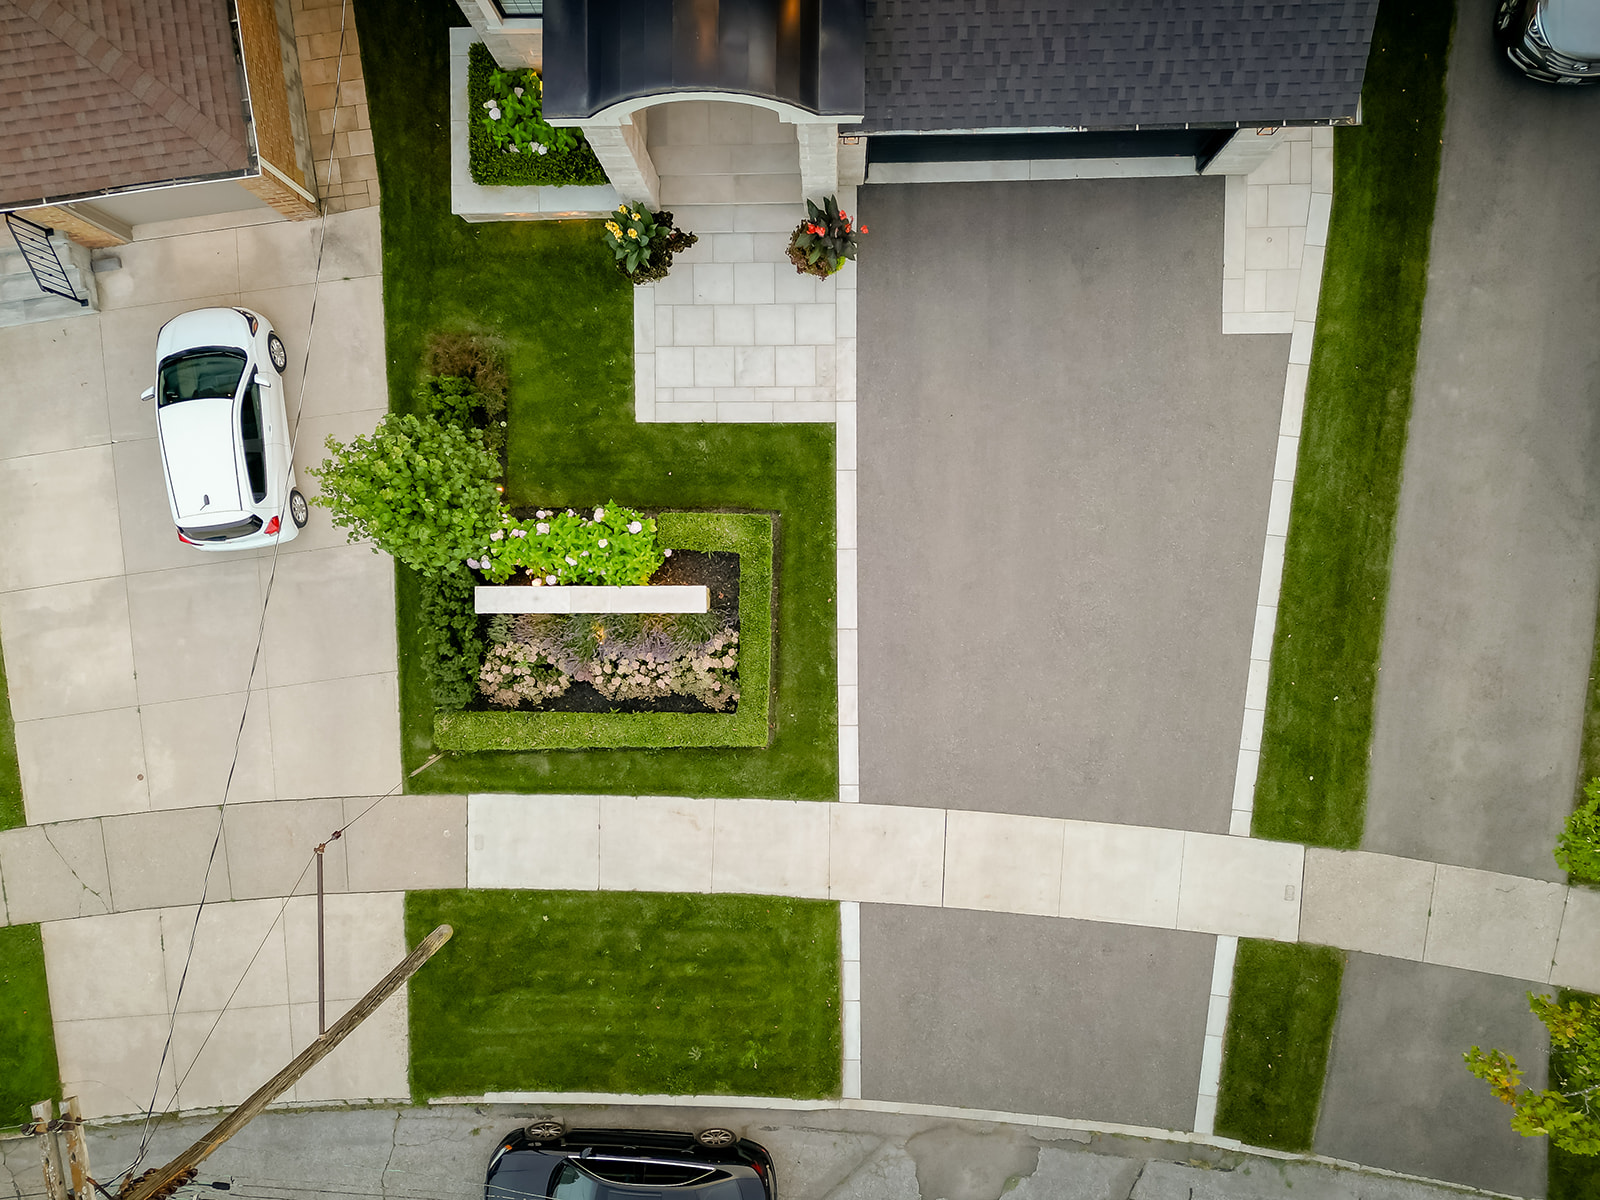 Top-down view of the driveway in front of the house.